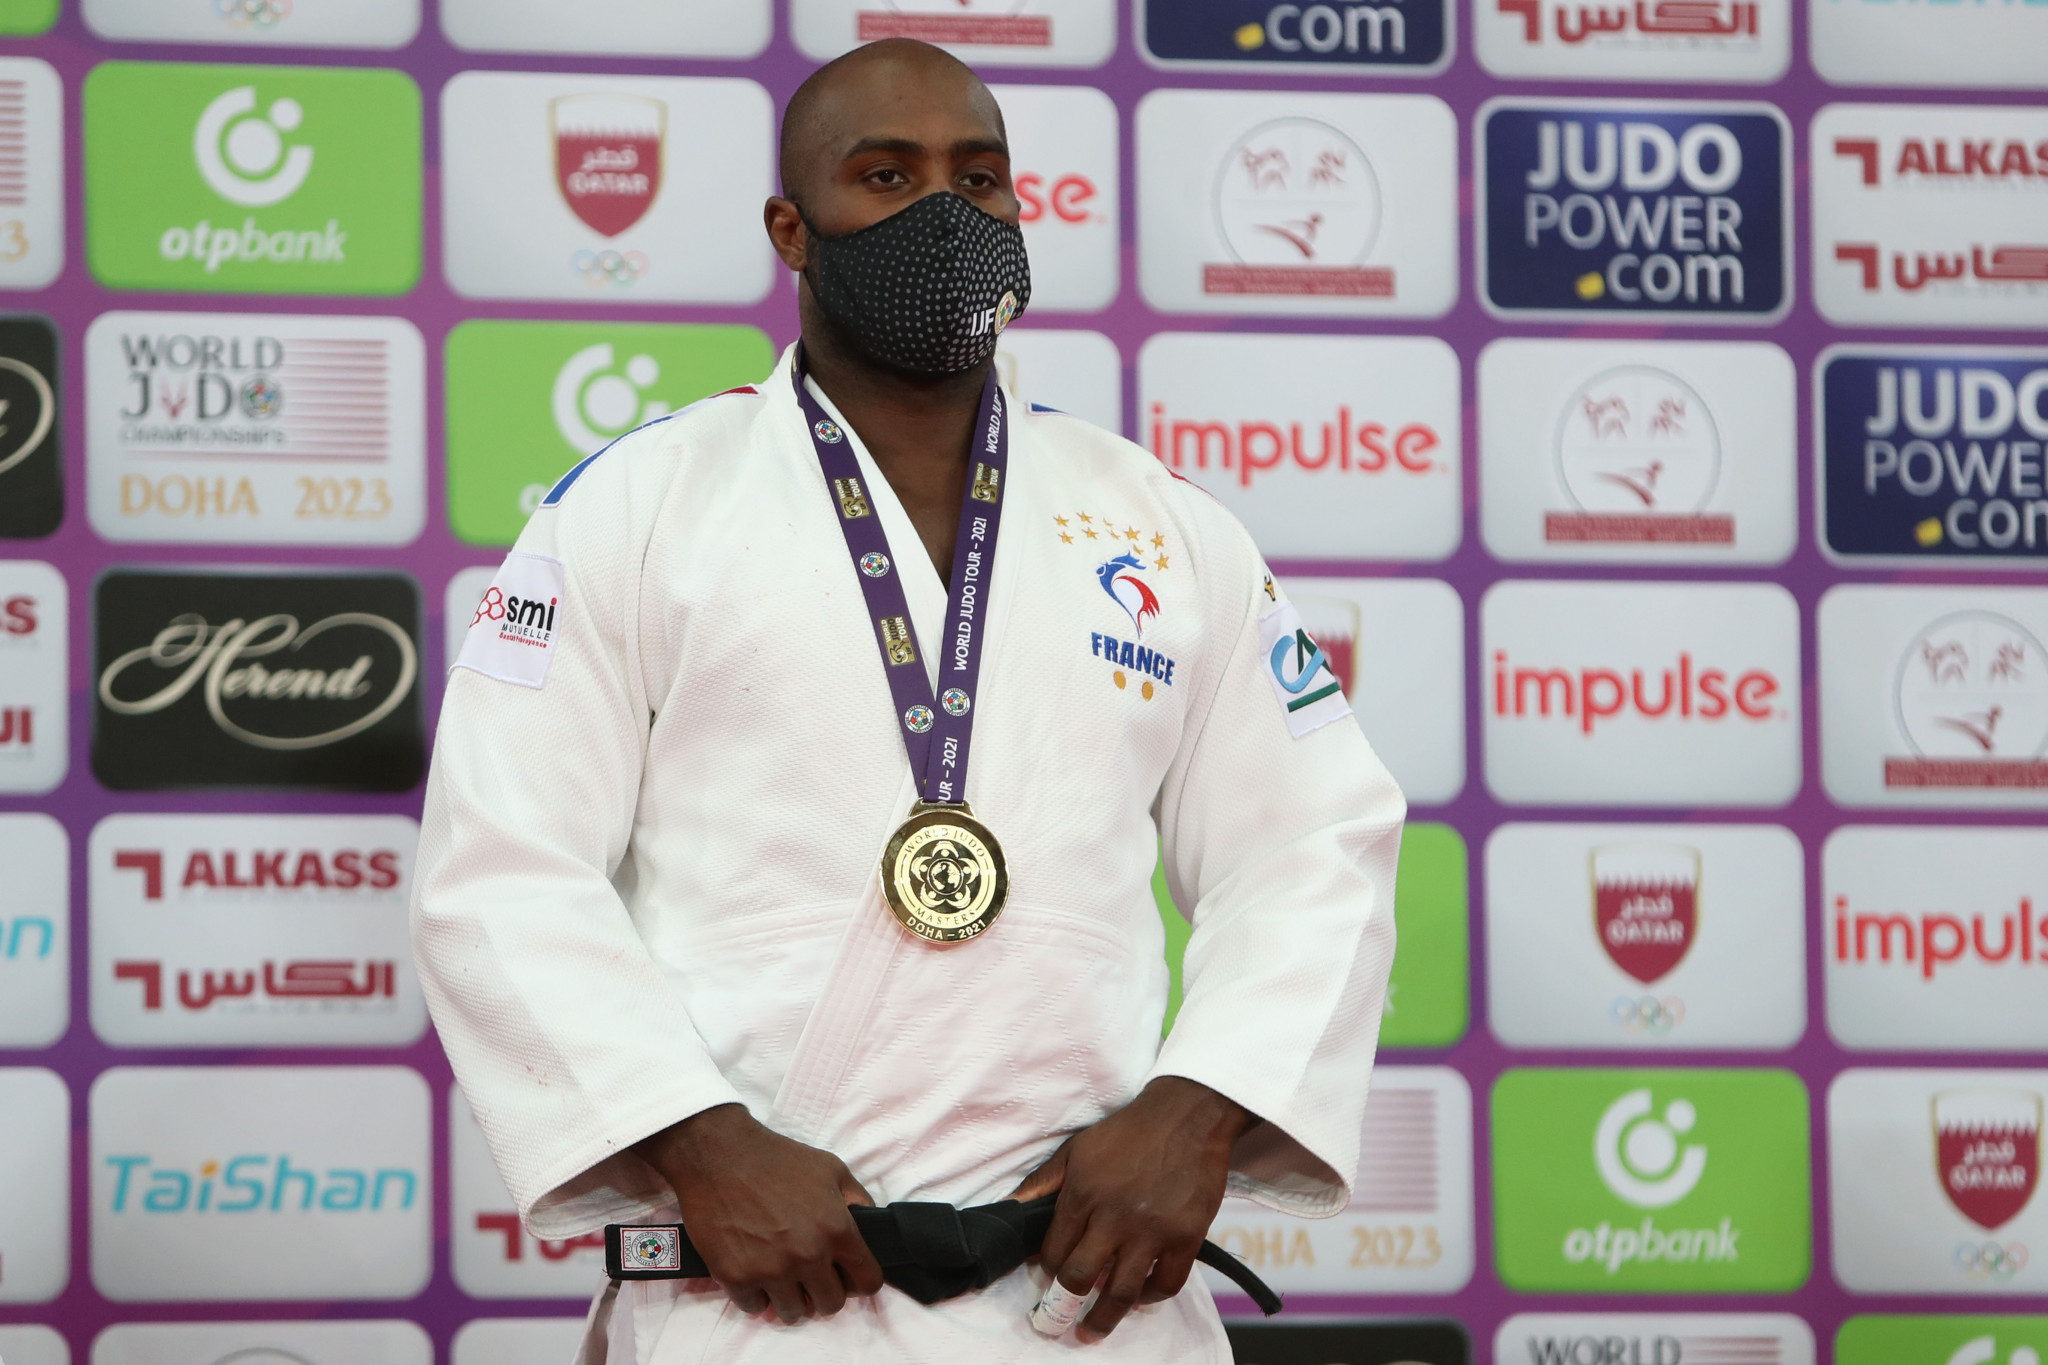 Teddy Riner won gold at the IJF World Judo Masters in Doha ©Getty Images